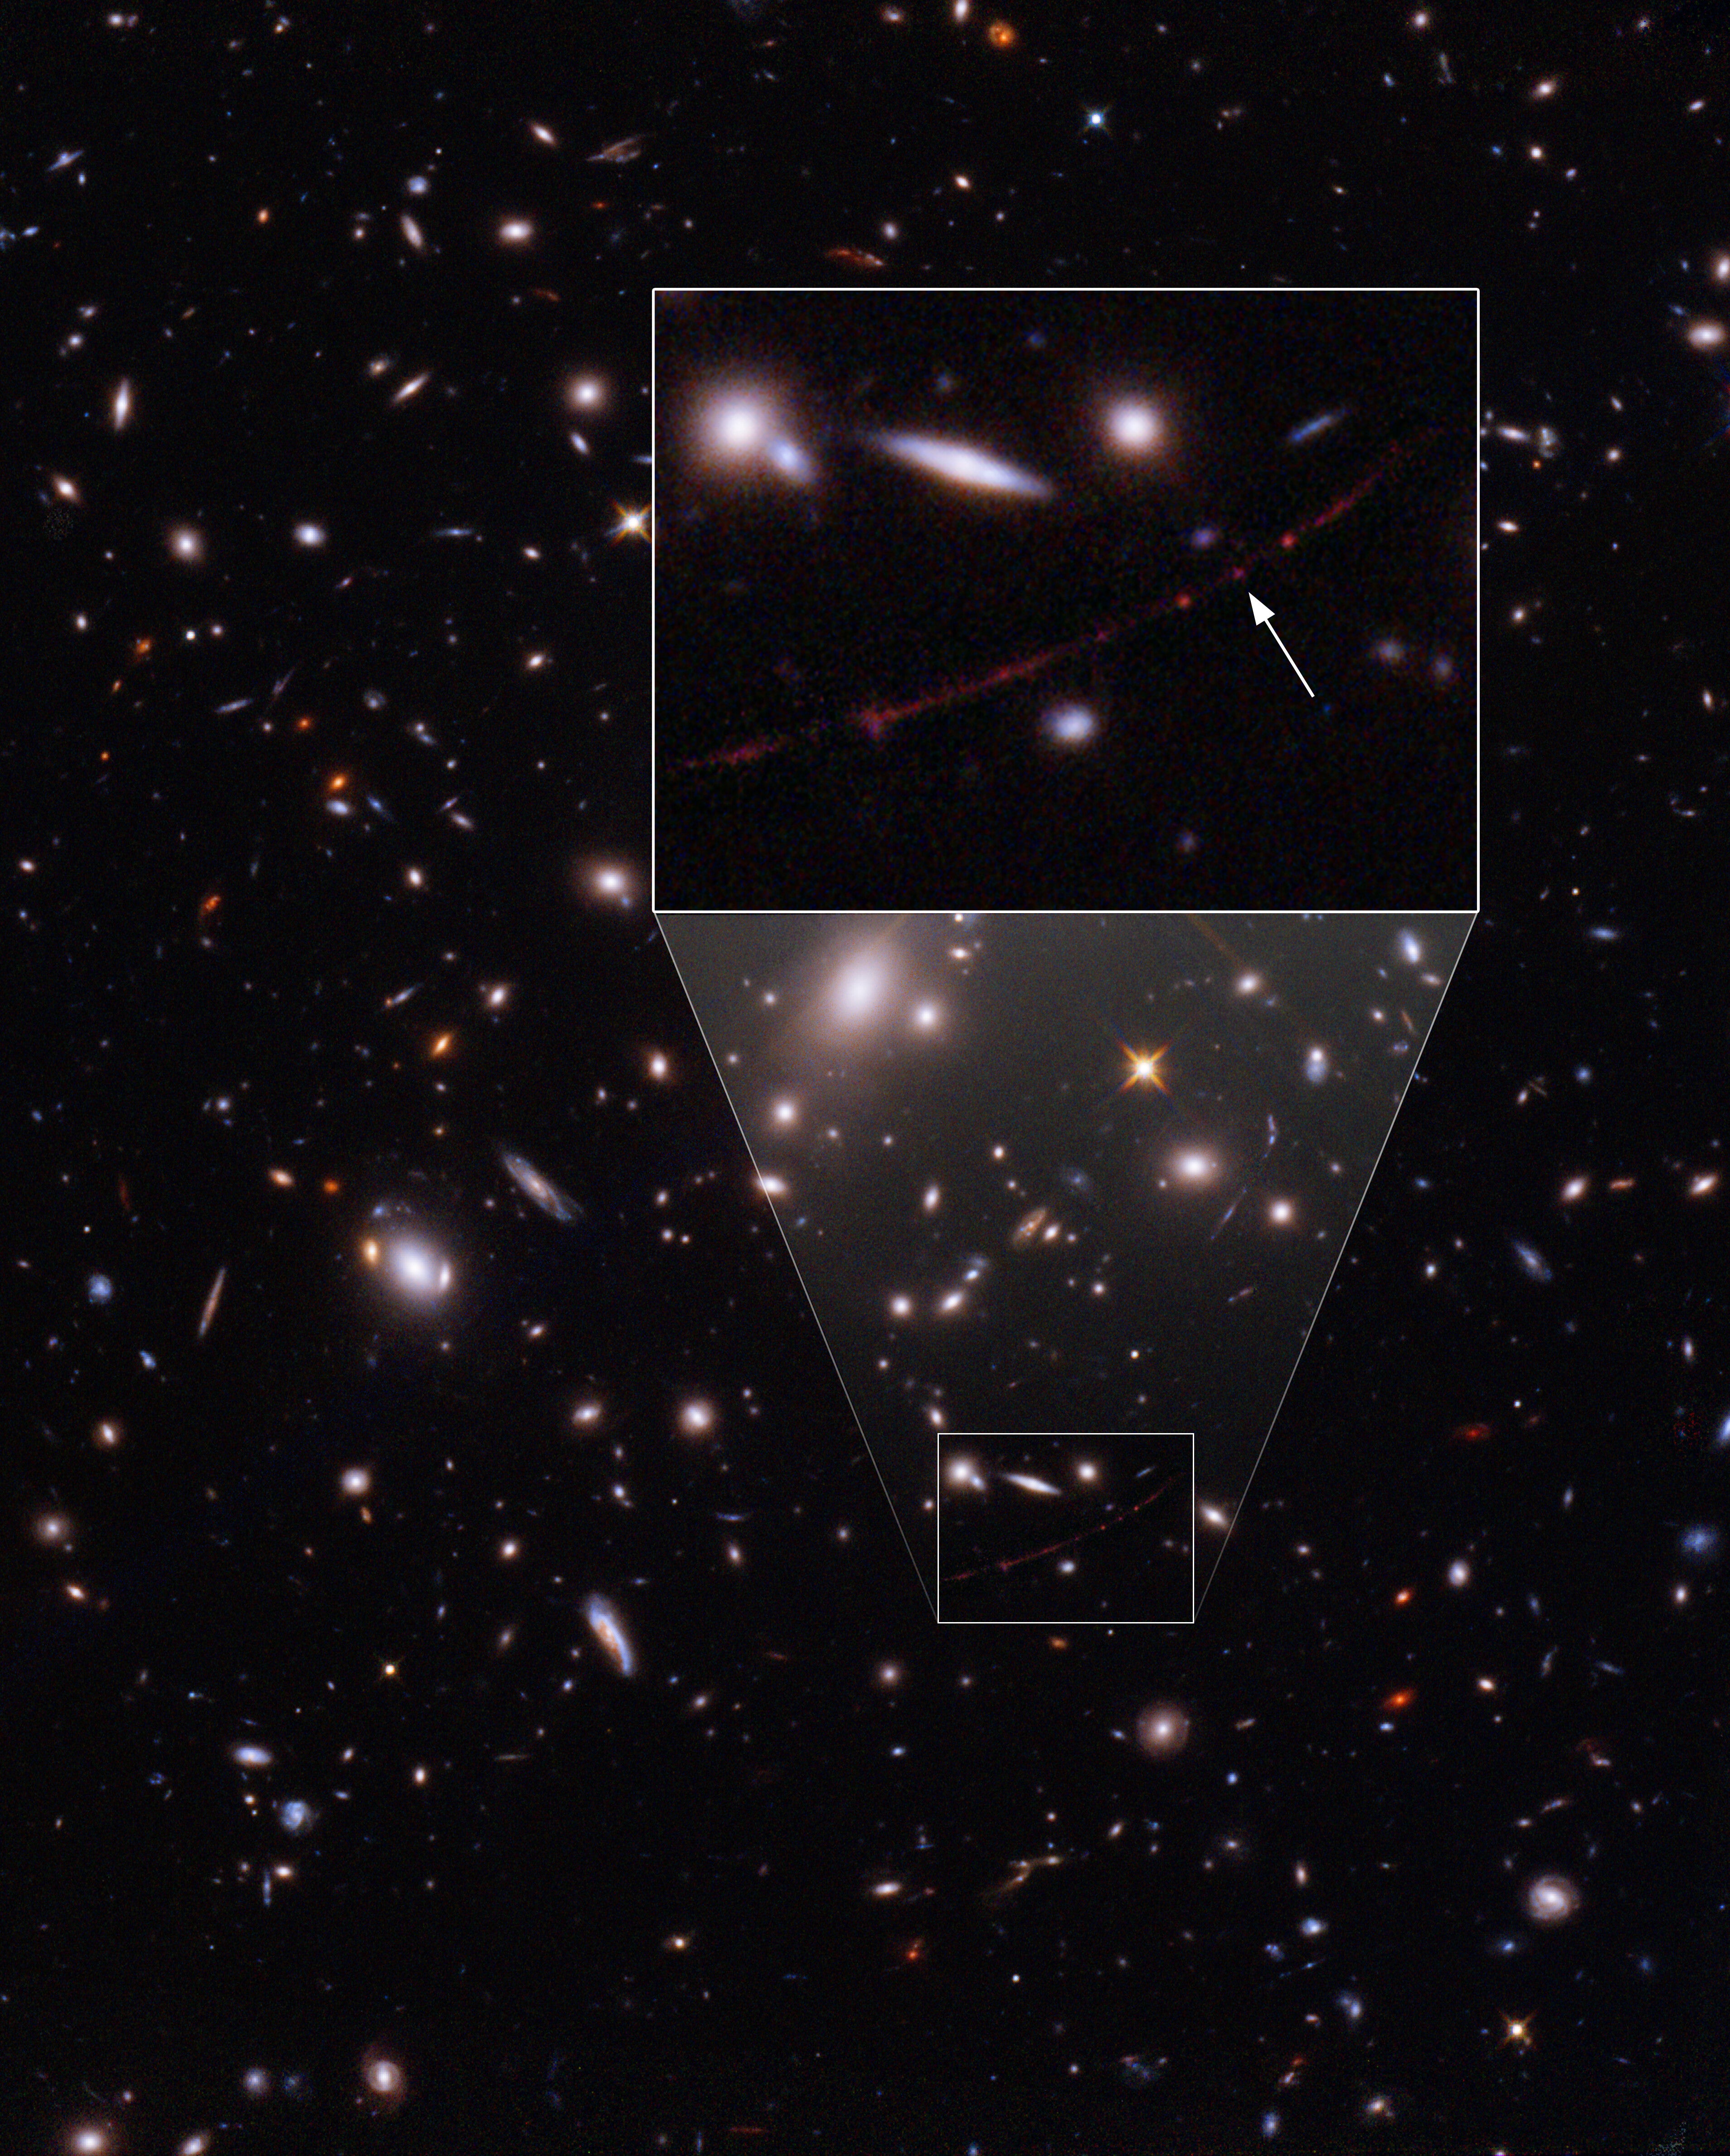 Earendel, the most distant star ever discovered is marked here with an arrow within the red arc of its host galaxy as seen through gravitational lensing.